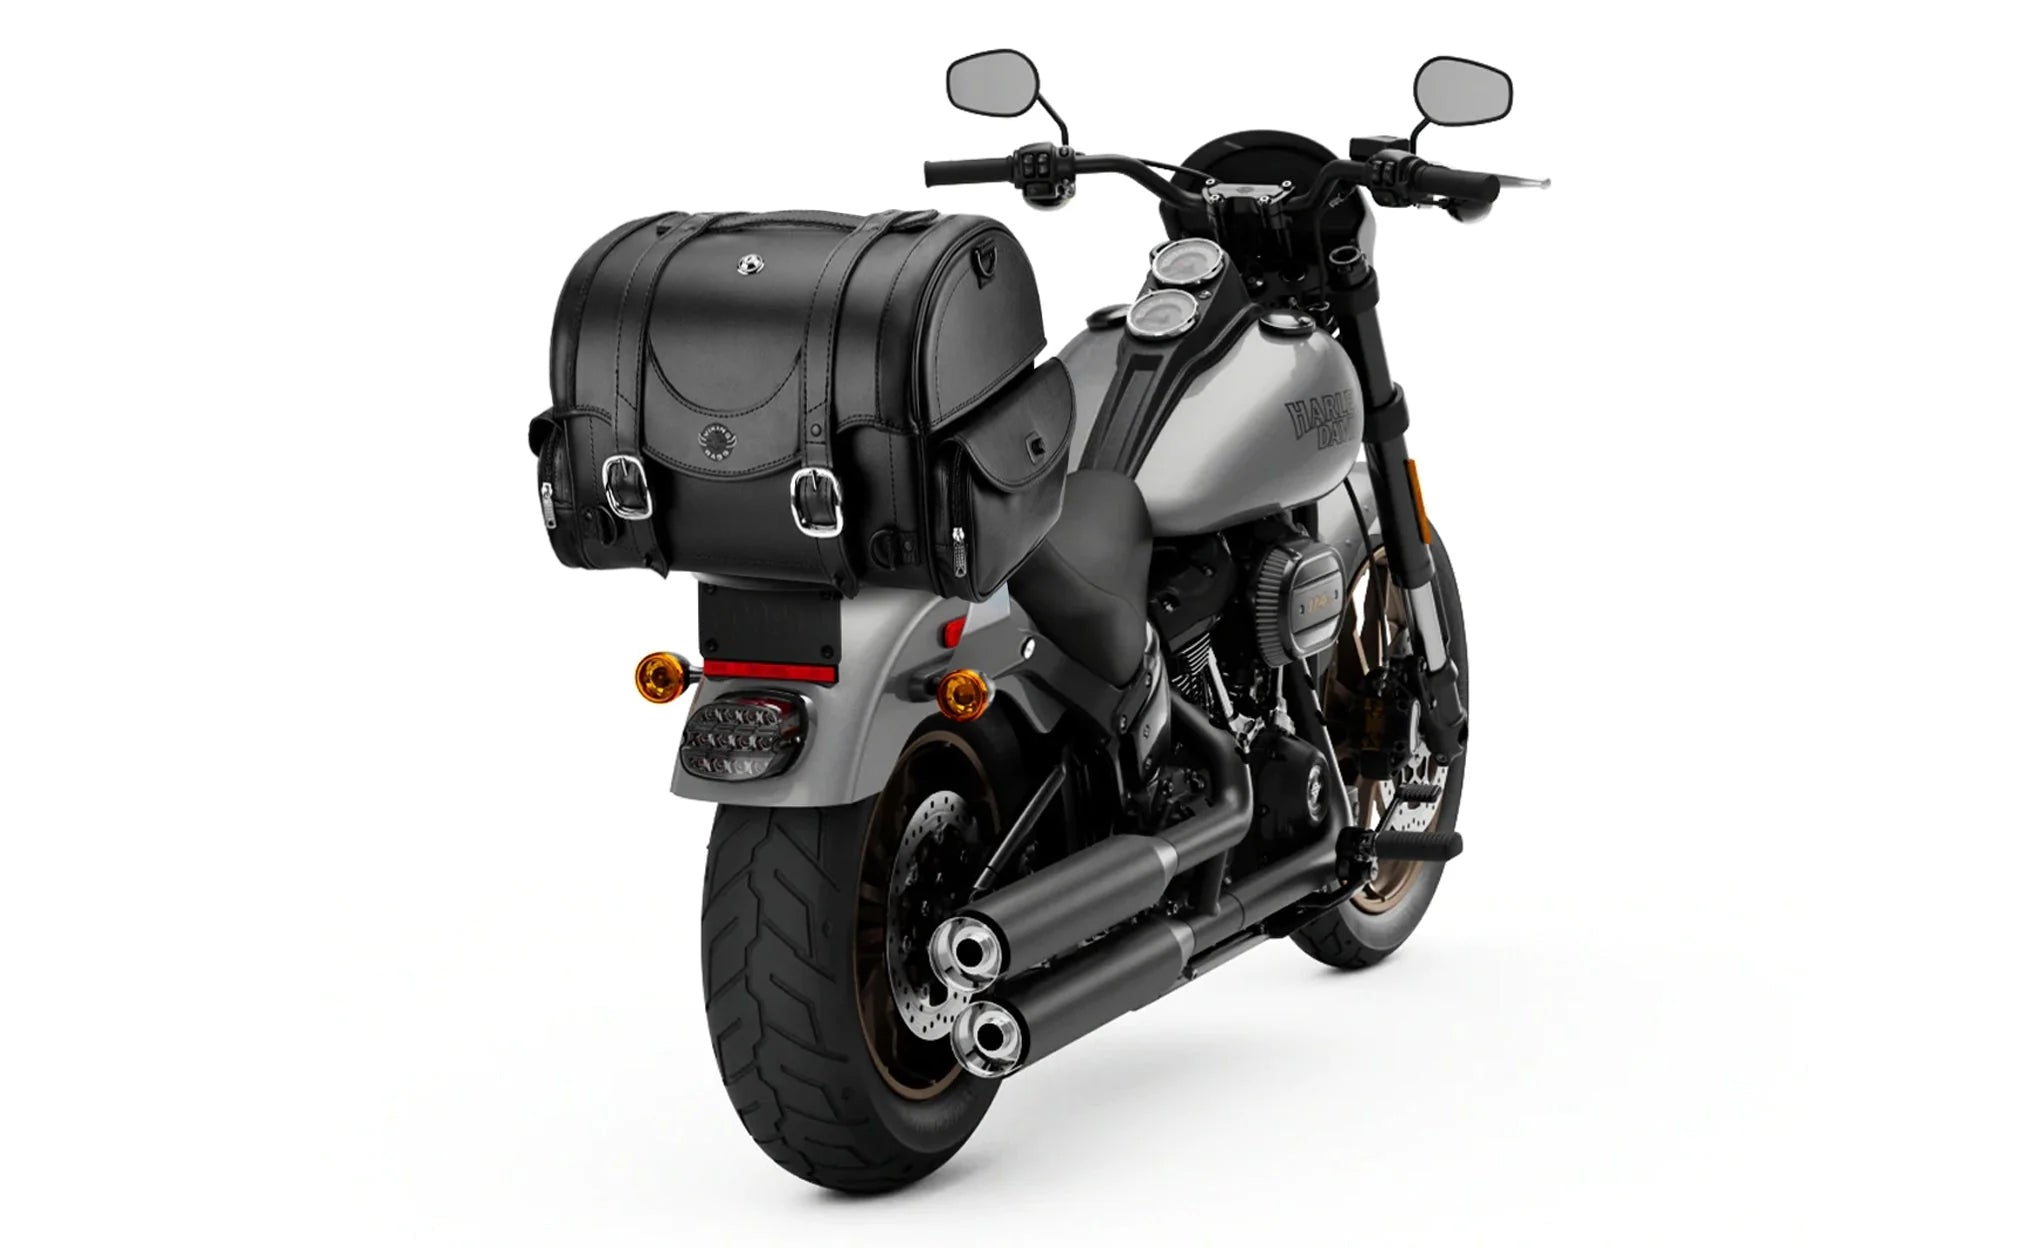 21L - Century Medium Hysoung Leather Motorcycle Trunk Bag on Bike Photo @expand